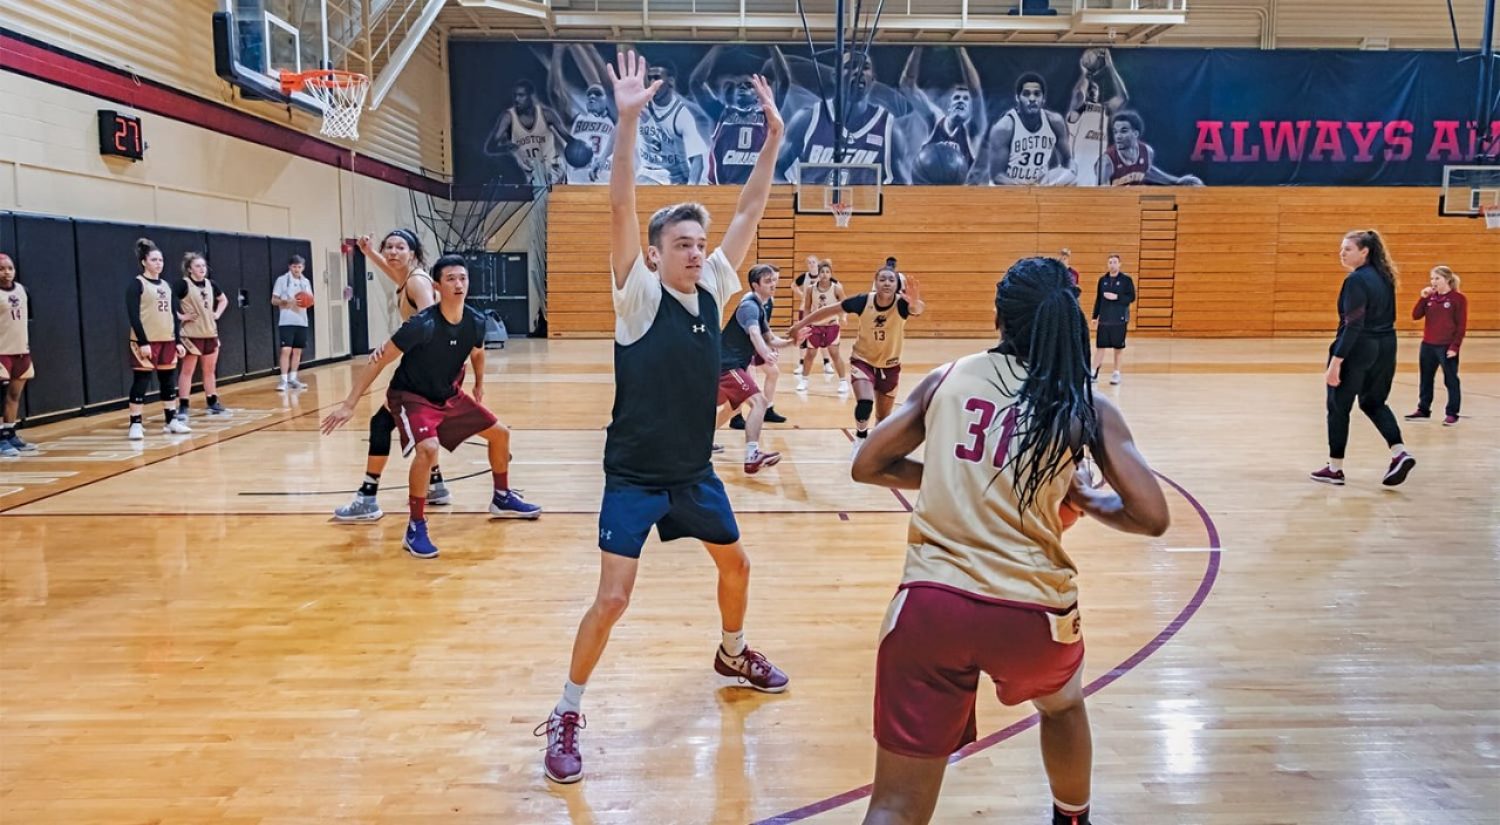 Women's basketball team works out with scout team